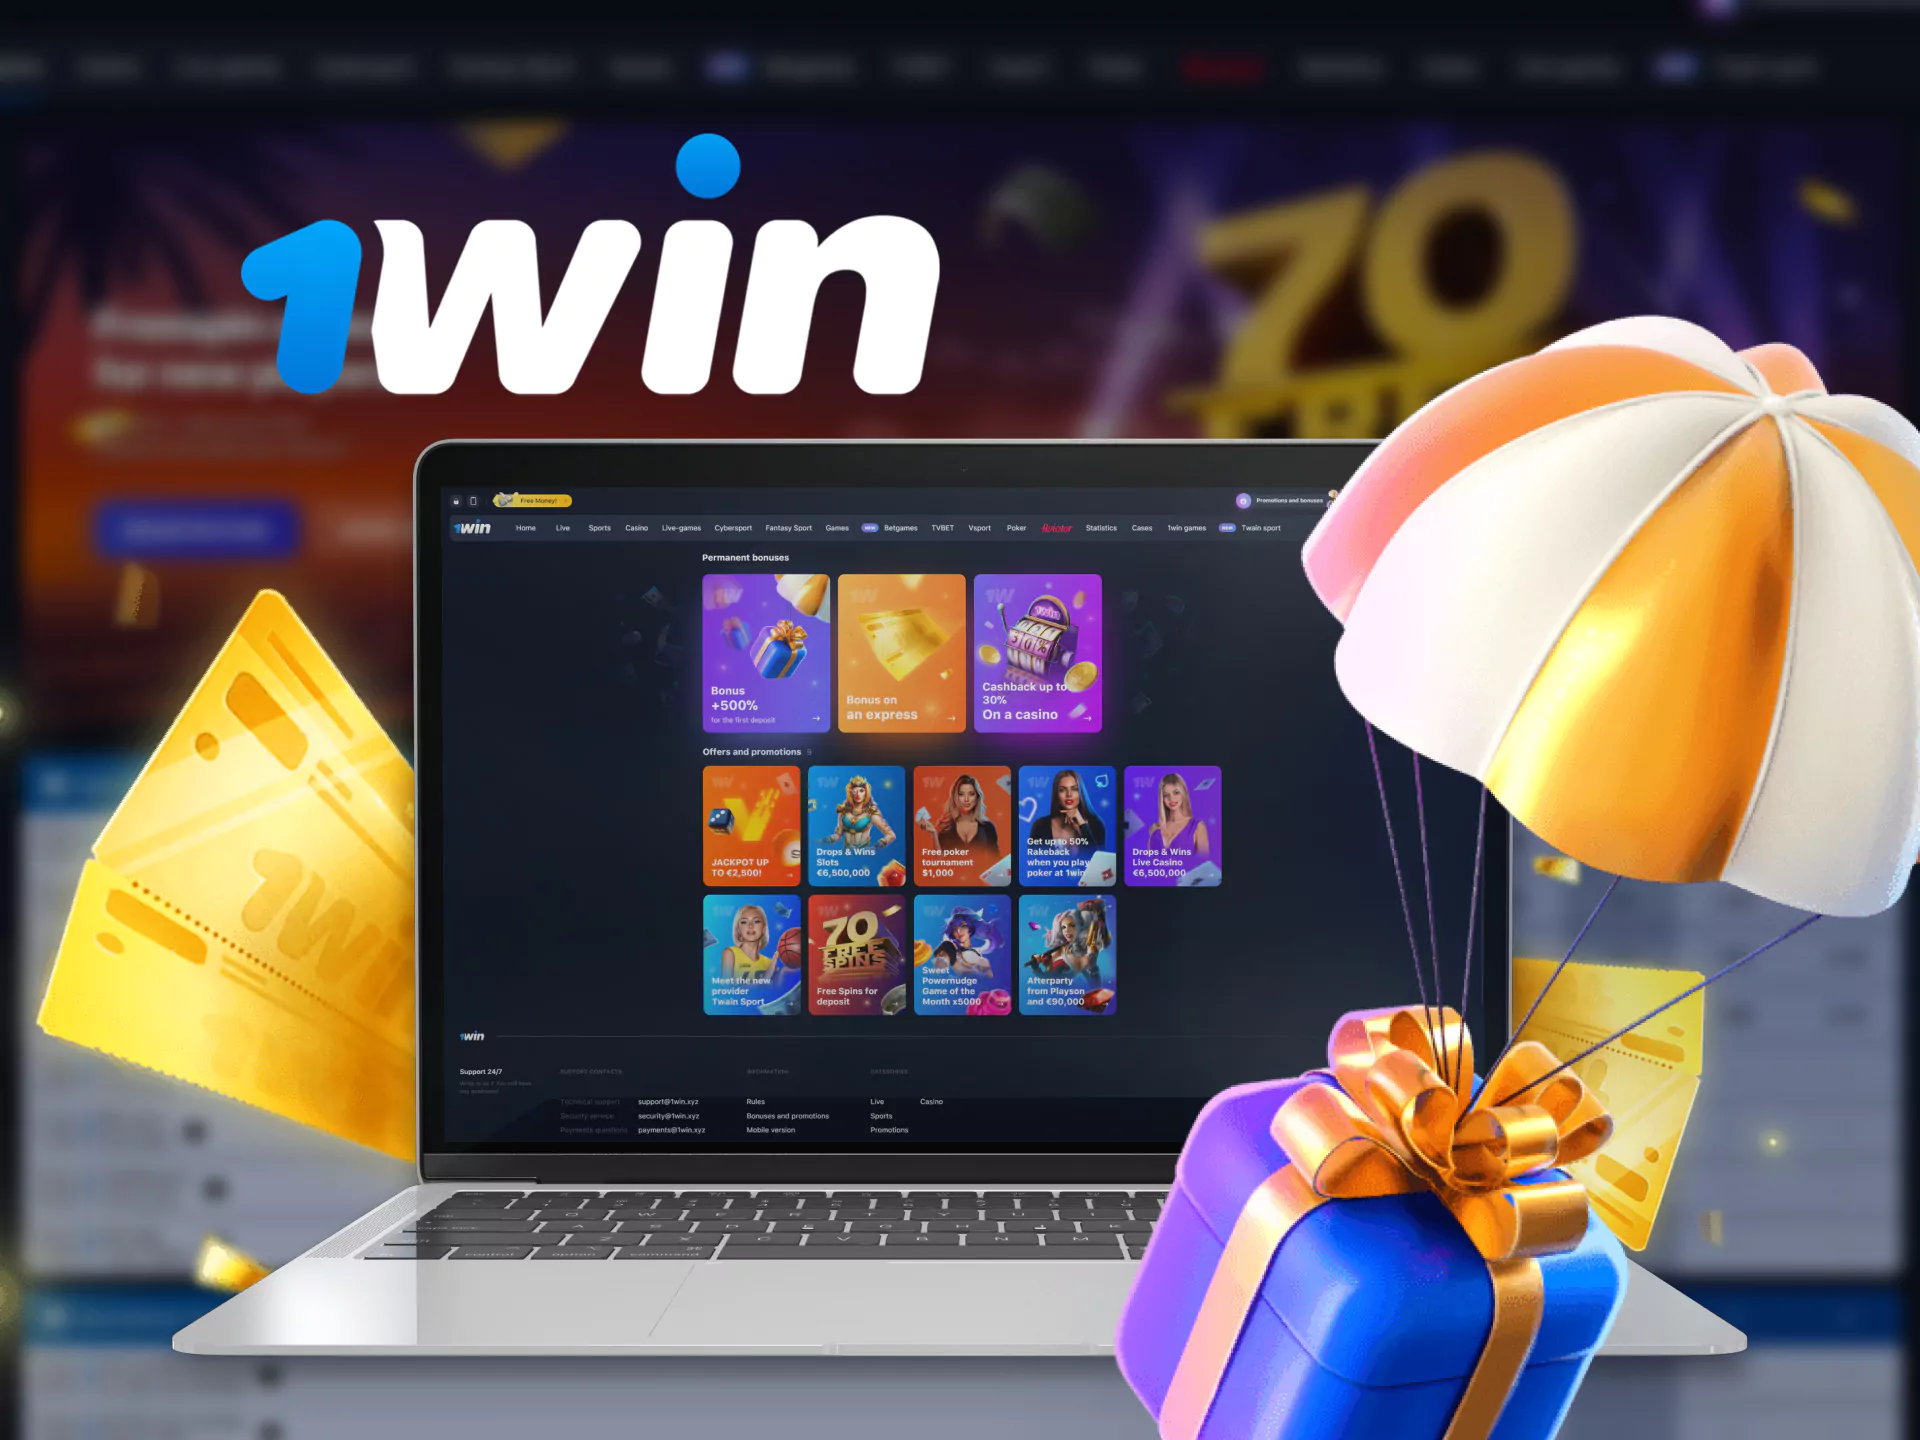 In 1Win, get a special bonus for betting on esports.